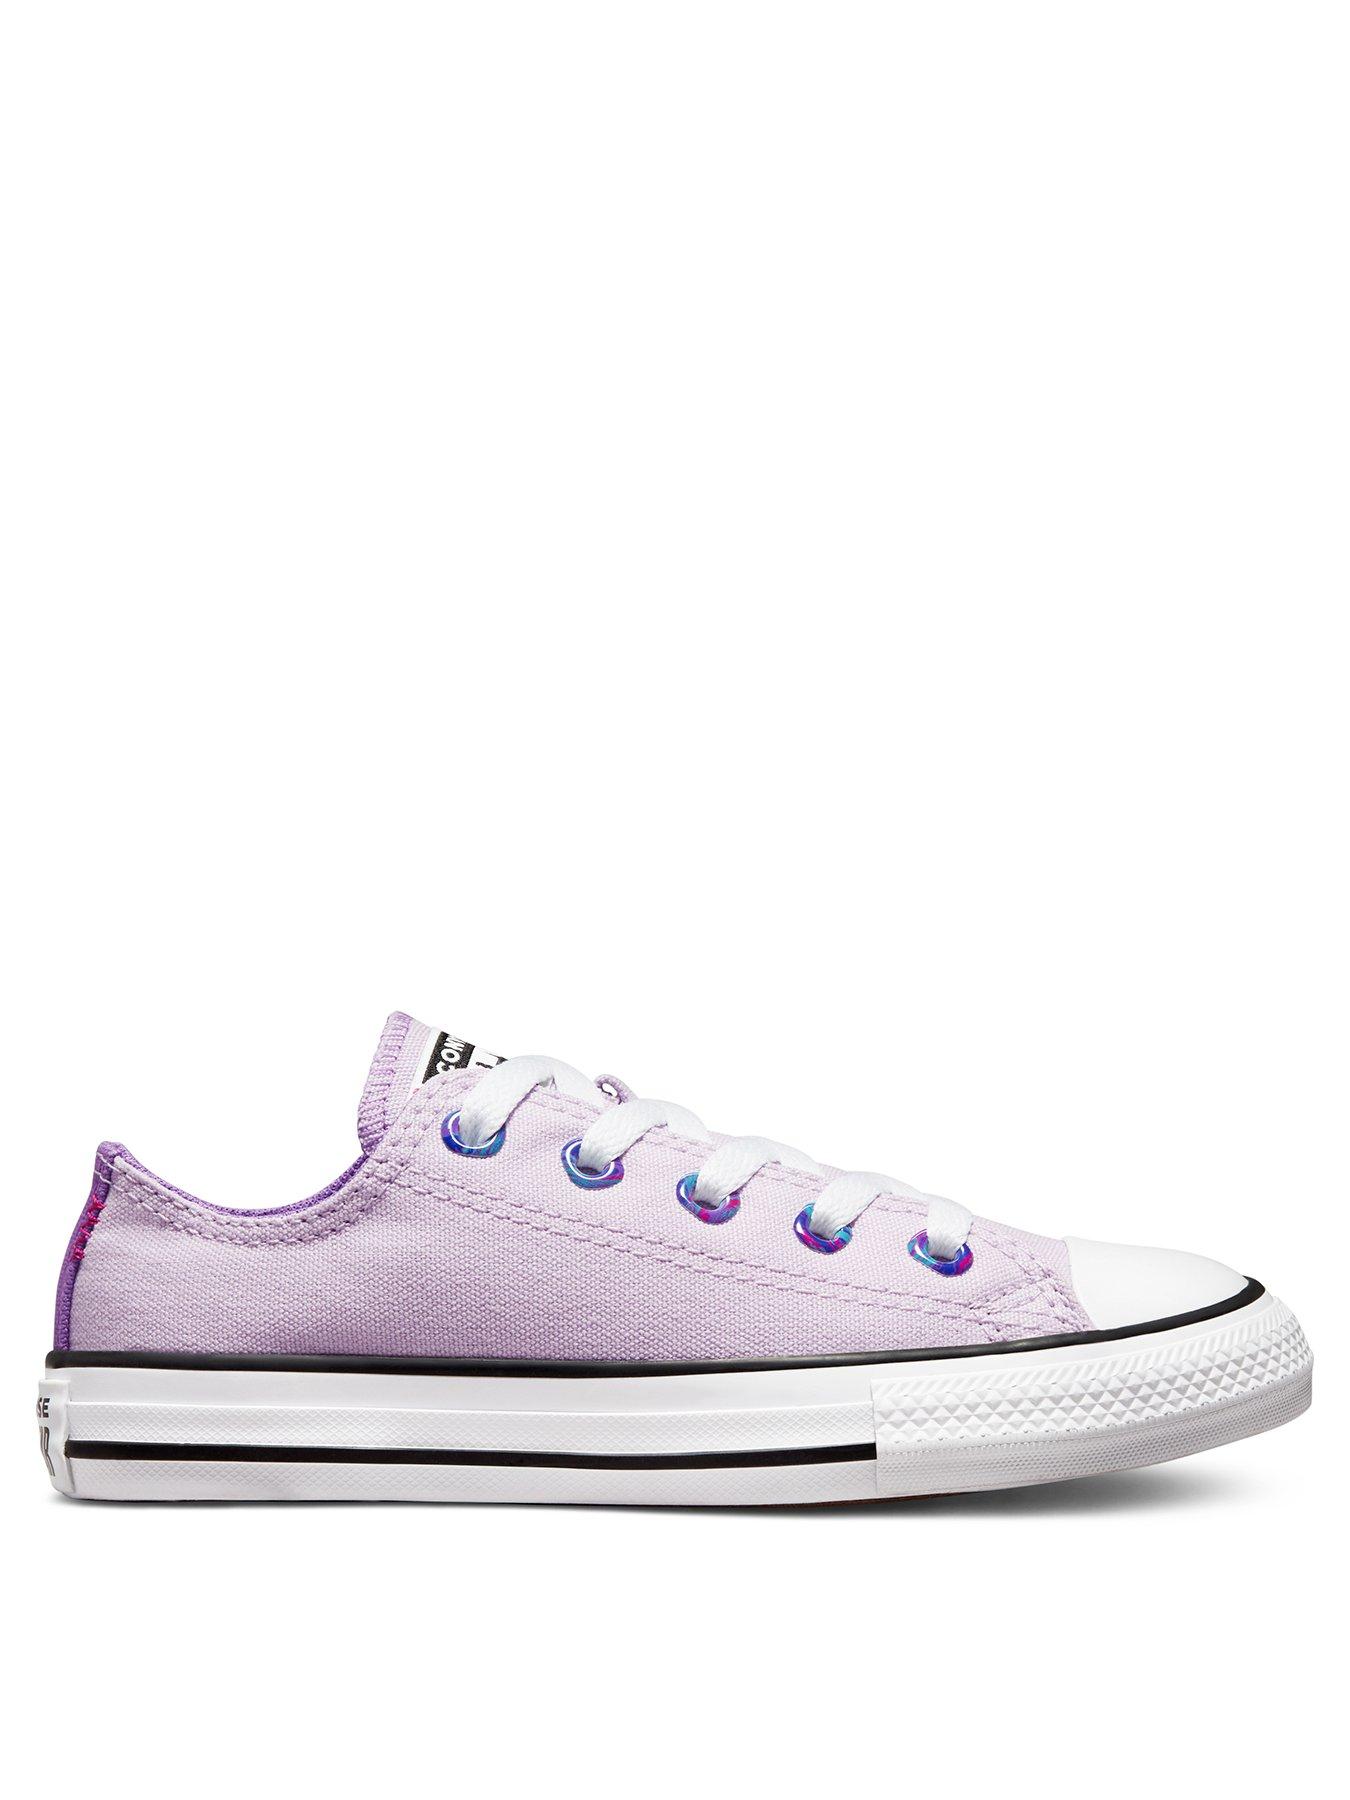 Kids Chuck Taylor All Star Ox Childrens Girls Color Pop Trainers -Purple